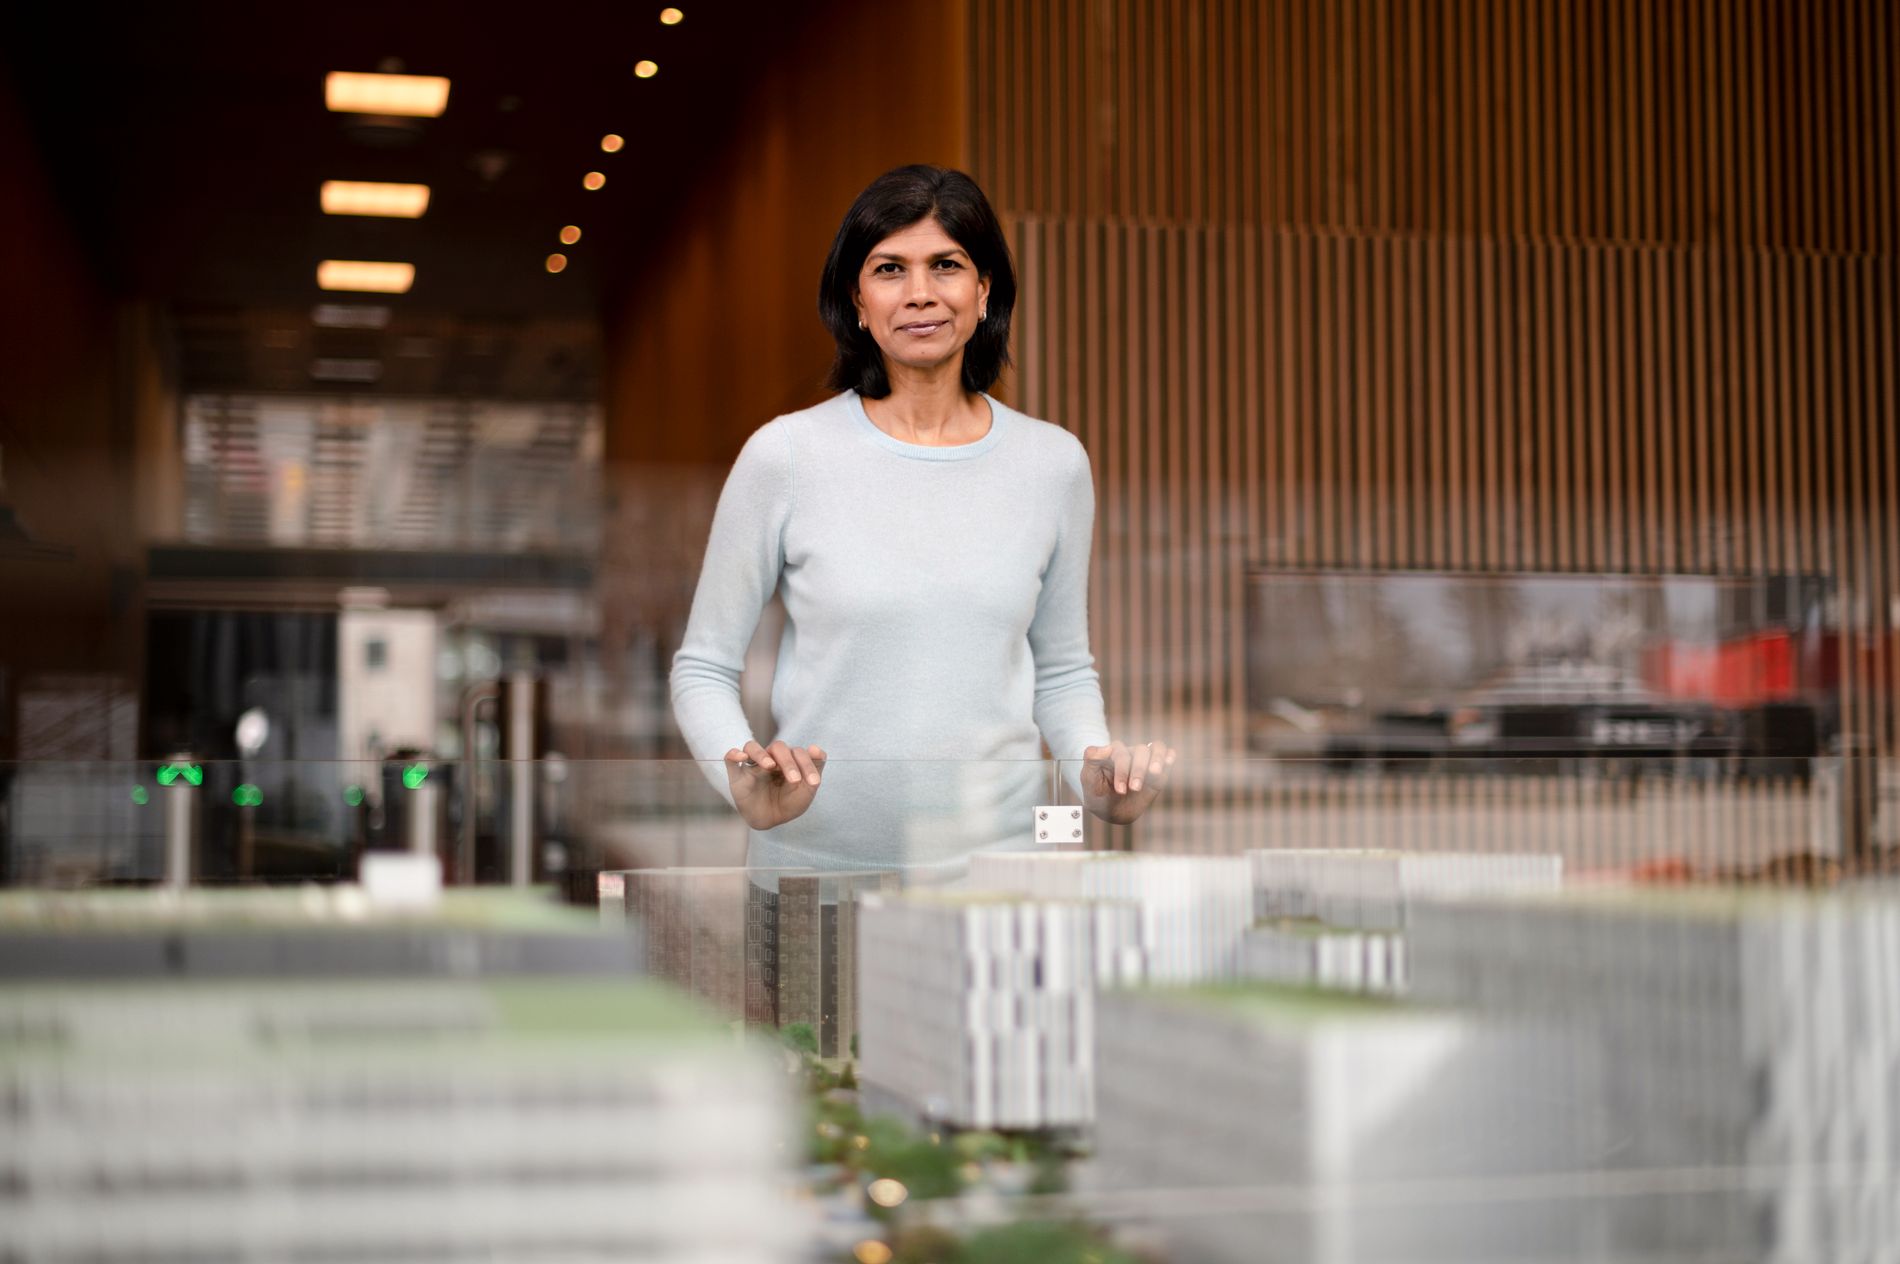 Data Connectivity: Cognites programs put data in context, including via artificial intelligence, says Laxmi Akkaraju.  Here with an Aker Tech model in Fornebu, where Cognite will relocate.